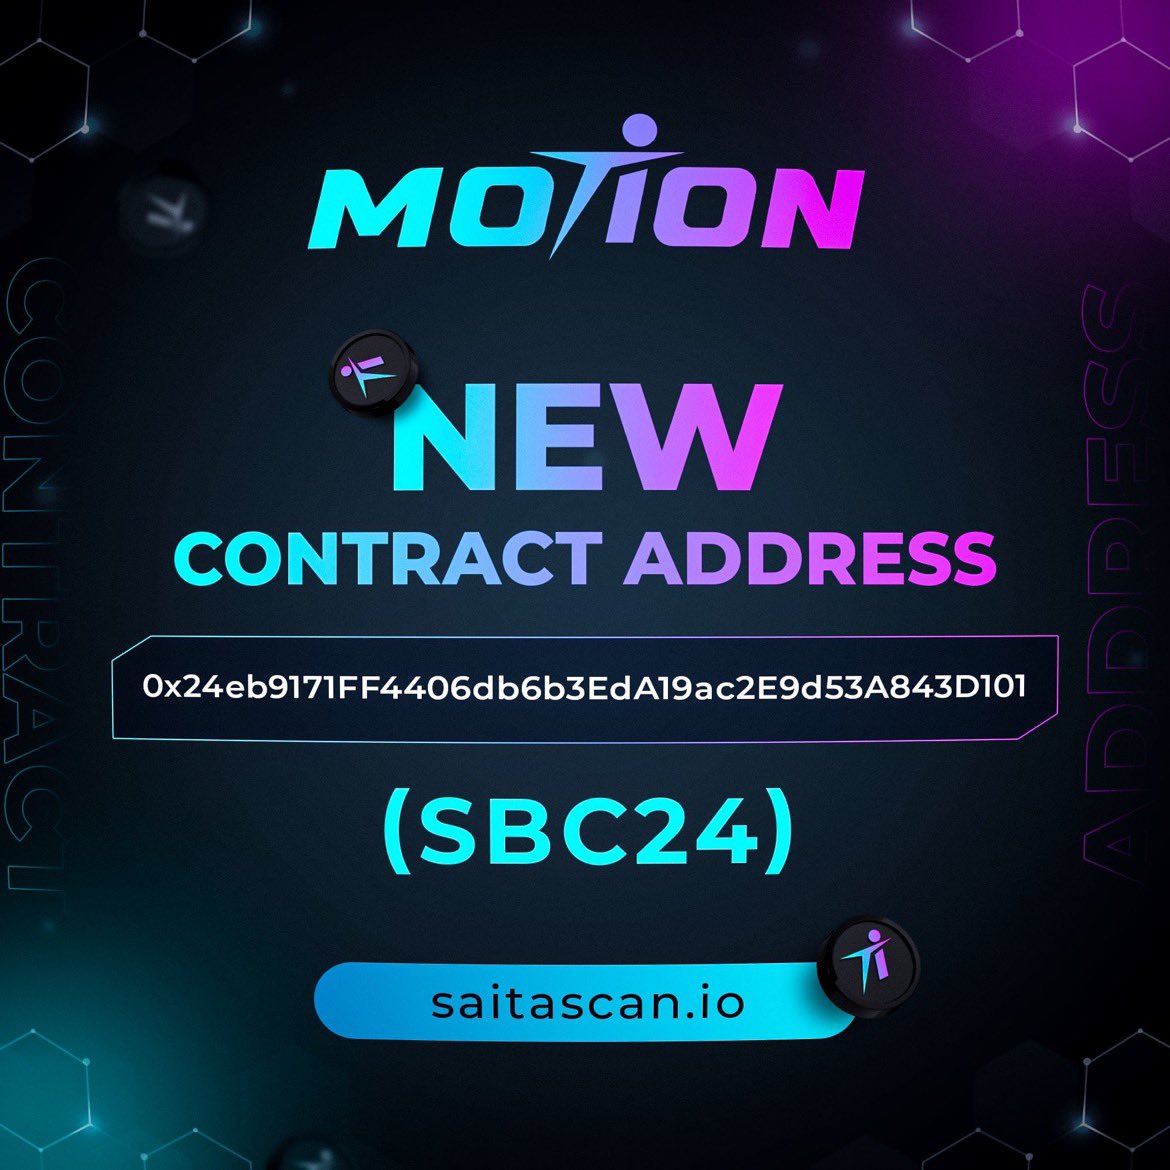 WOW HOW CRAZY!?? Historic moment for both #MotionToken and #SaitaChain #SBC24 #SaitaChainCoin @SaitaChainCoin … 

Motion Launching Today 19:00 GMT which is 
3pm EST 
12pm PST 

MOTION THE FIRST LAUNCH for SaitaChain first token paired with #STC first transactions will happen